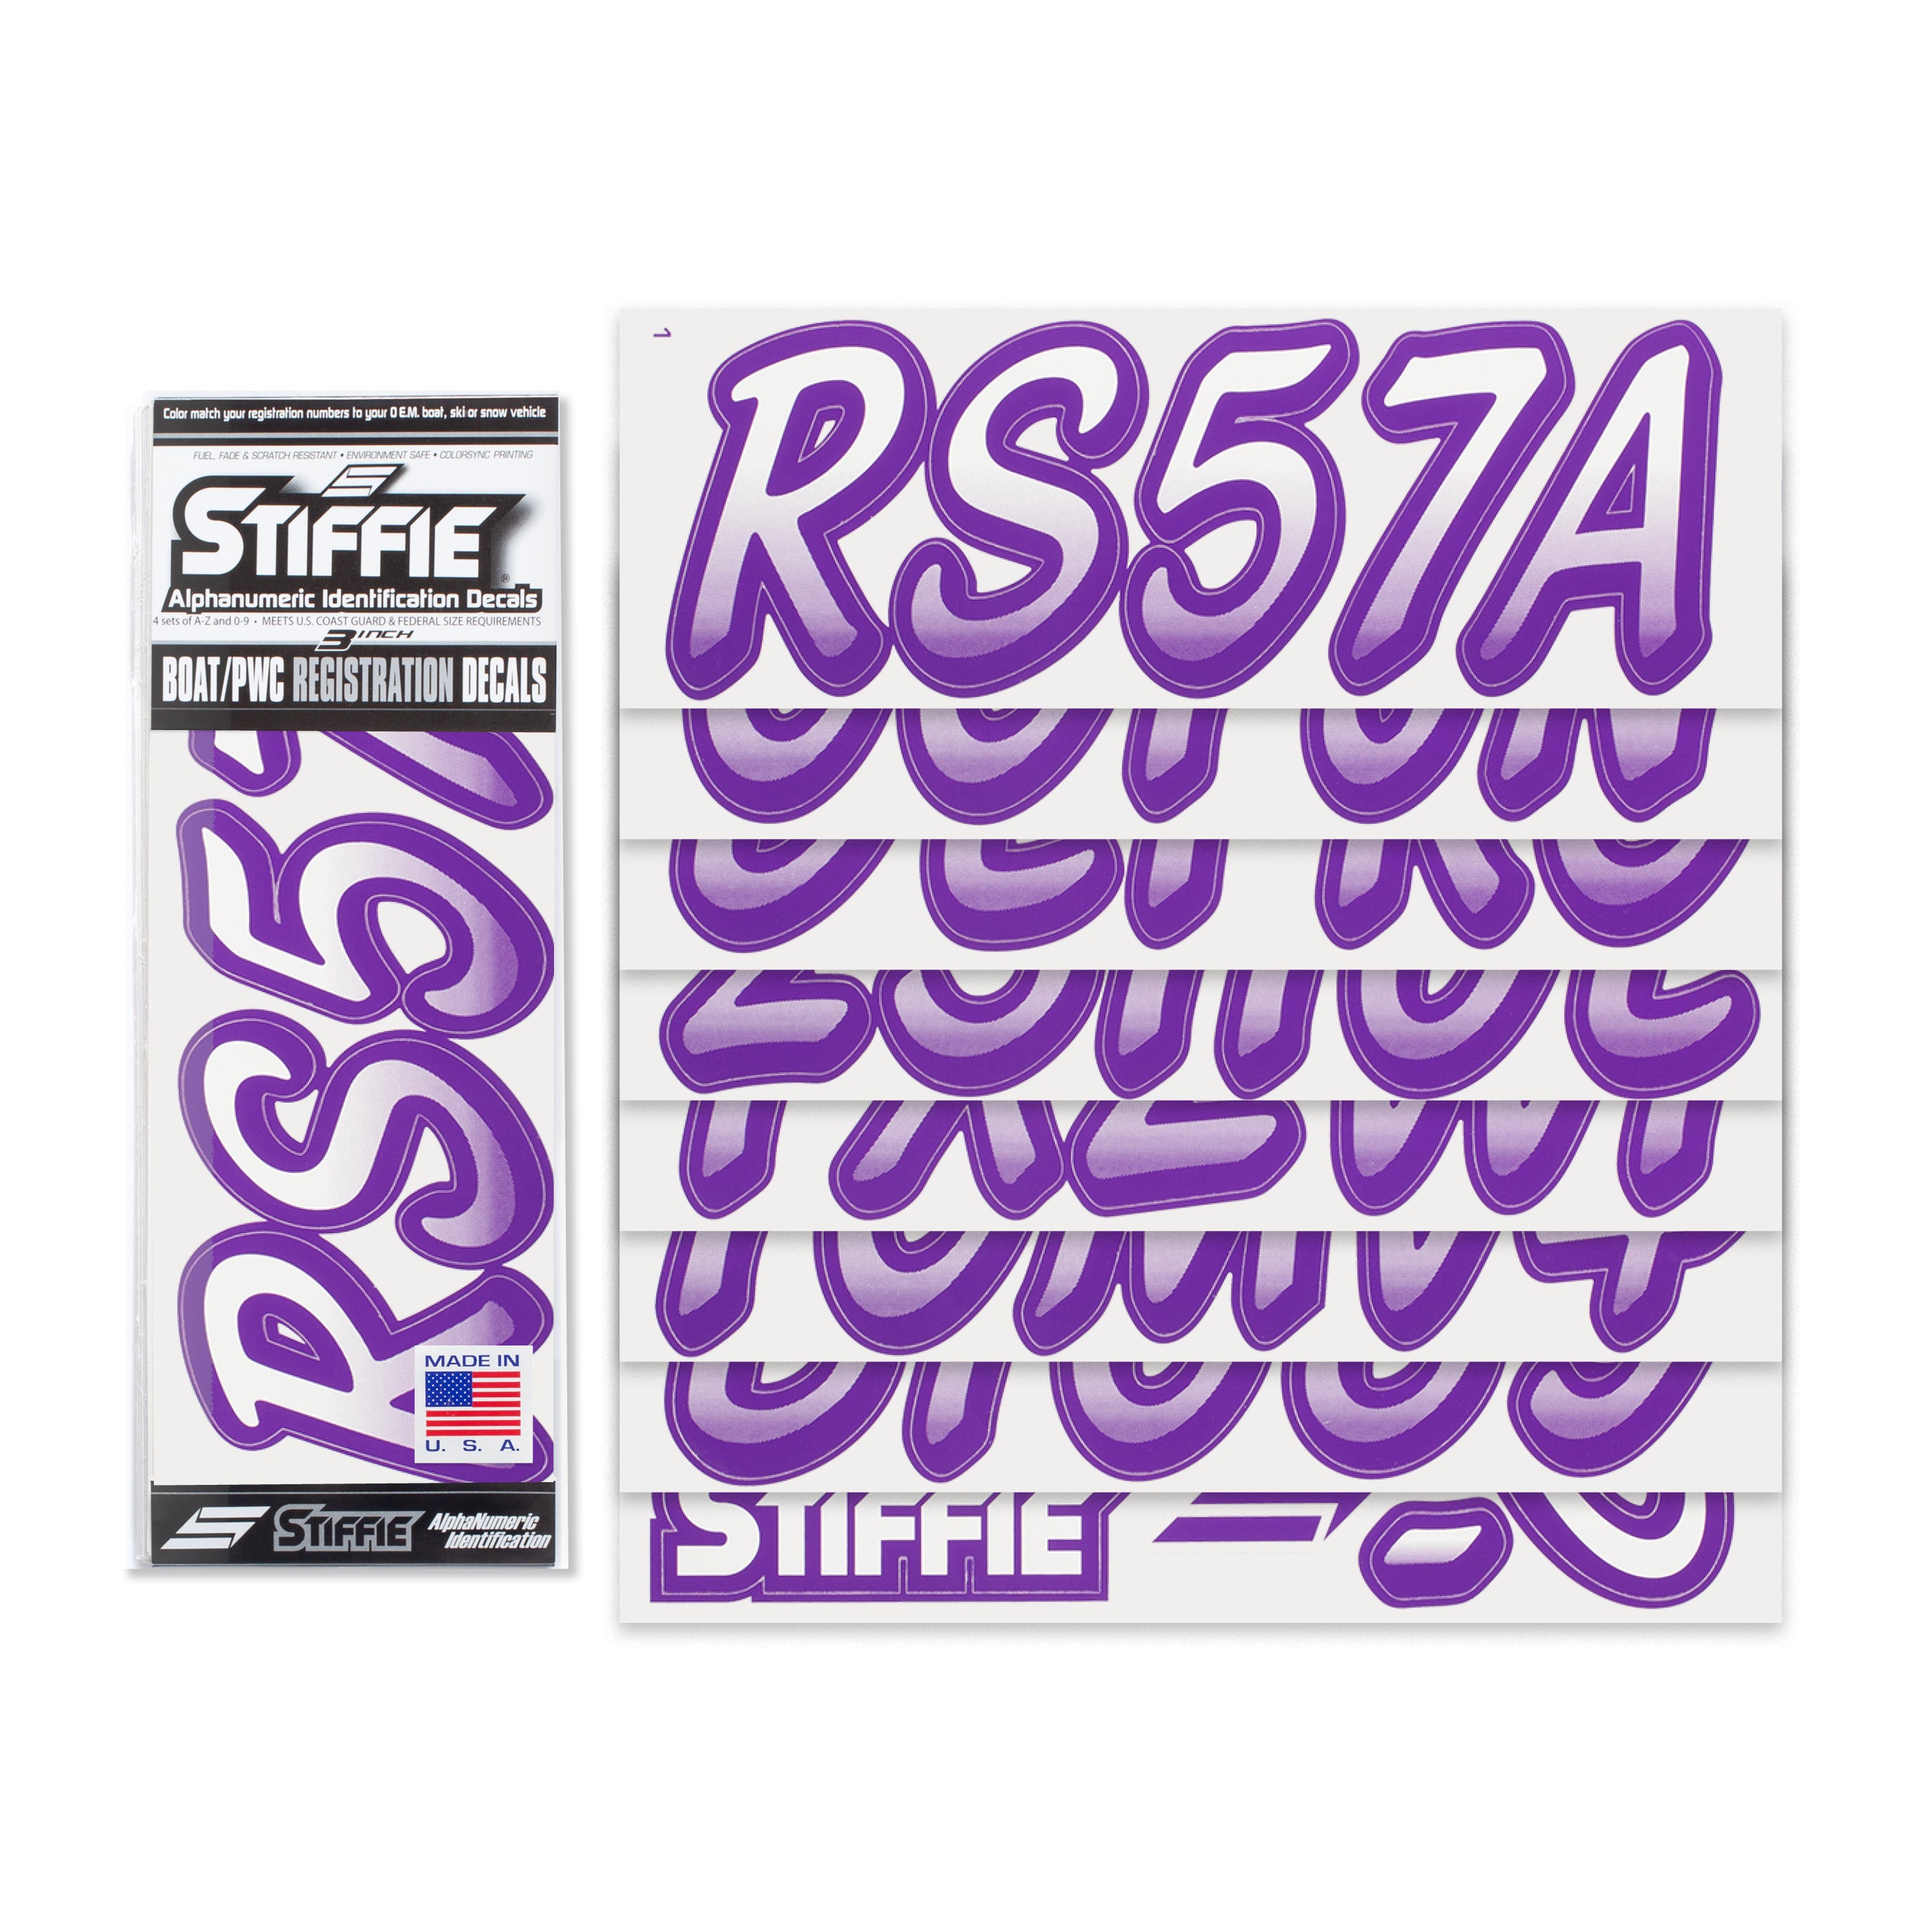 STIFFIE Whipline White/Purple 3" Alpha-Numeric Registration Identification Numbers Stickers Decals for Boats & Personal Watercraft